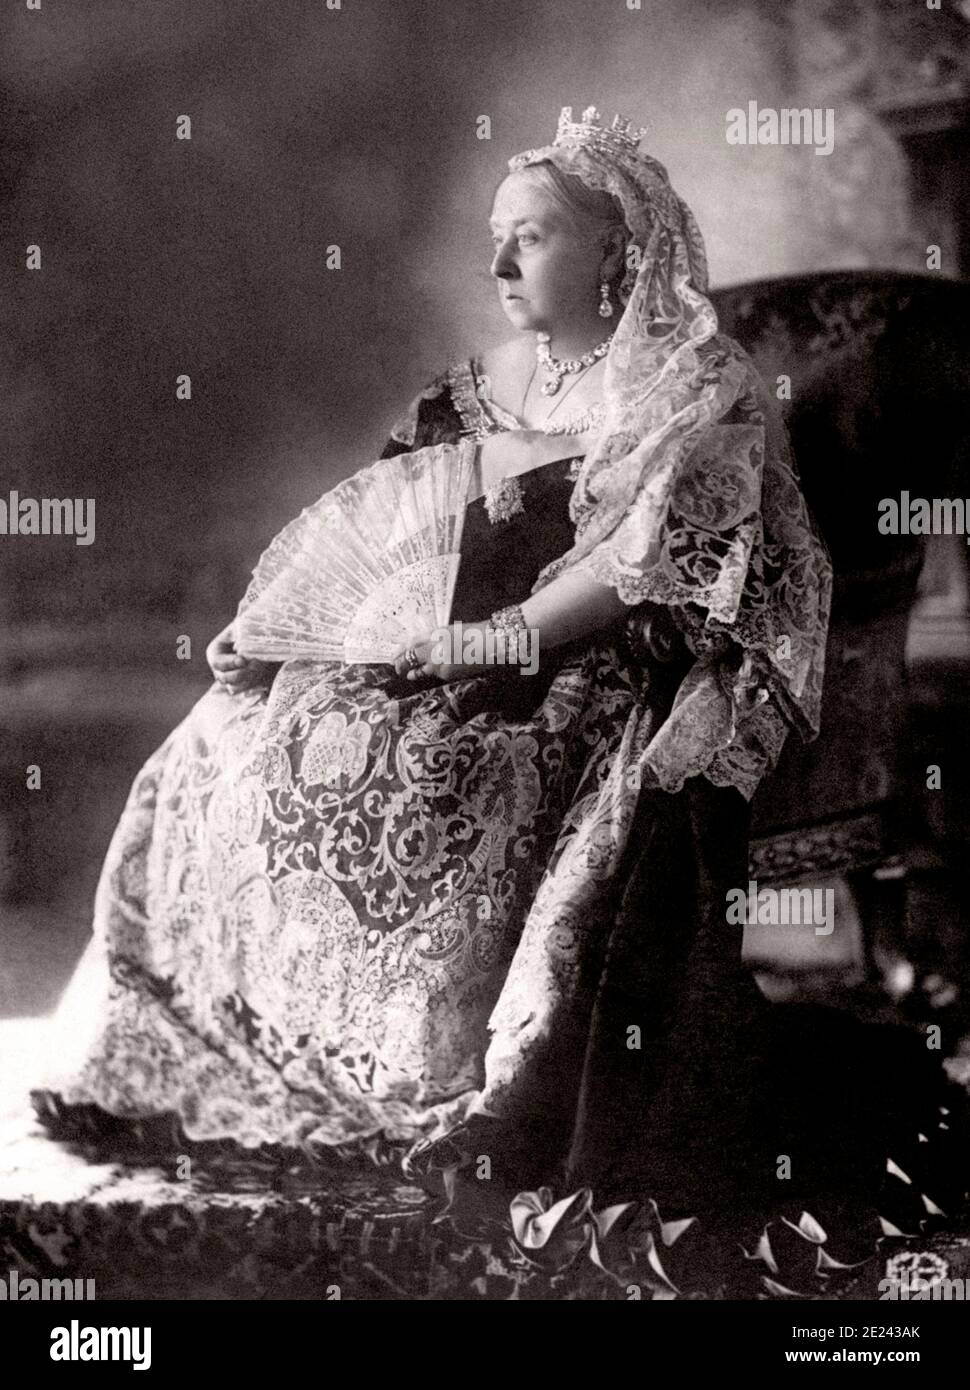 Queen Victoria's Diamond Jubilee photographic portrait. Victoria (1819 – 1901) was Queen of the United Kingdom of Great Britain and Ireland from 20 Ju Stock Photo